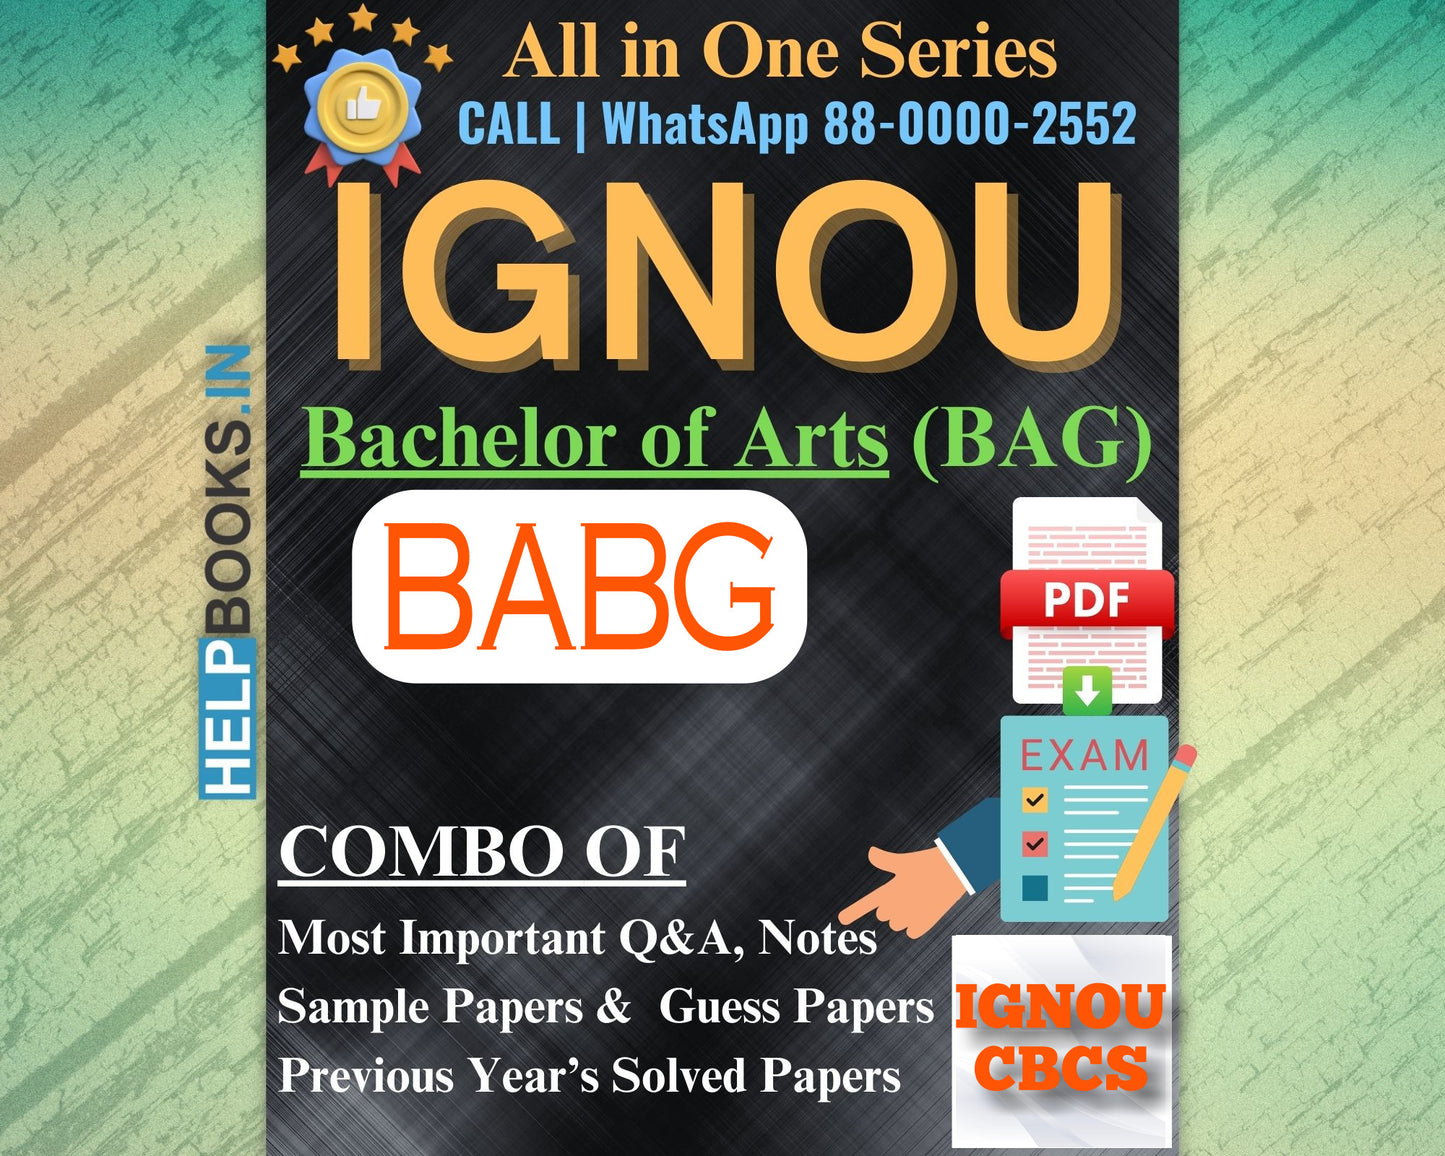 IGNOU BAG Online Study Package: Bachelor of Arts (BA) - Previous Year’s Solved Papers, Q&A, Exam Notes, Sample Papers, Guess Papers-BABG171